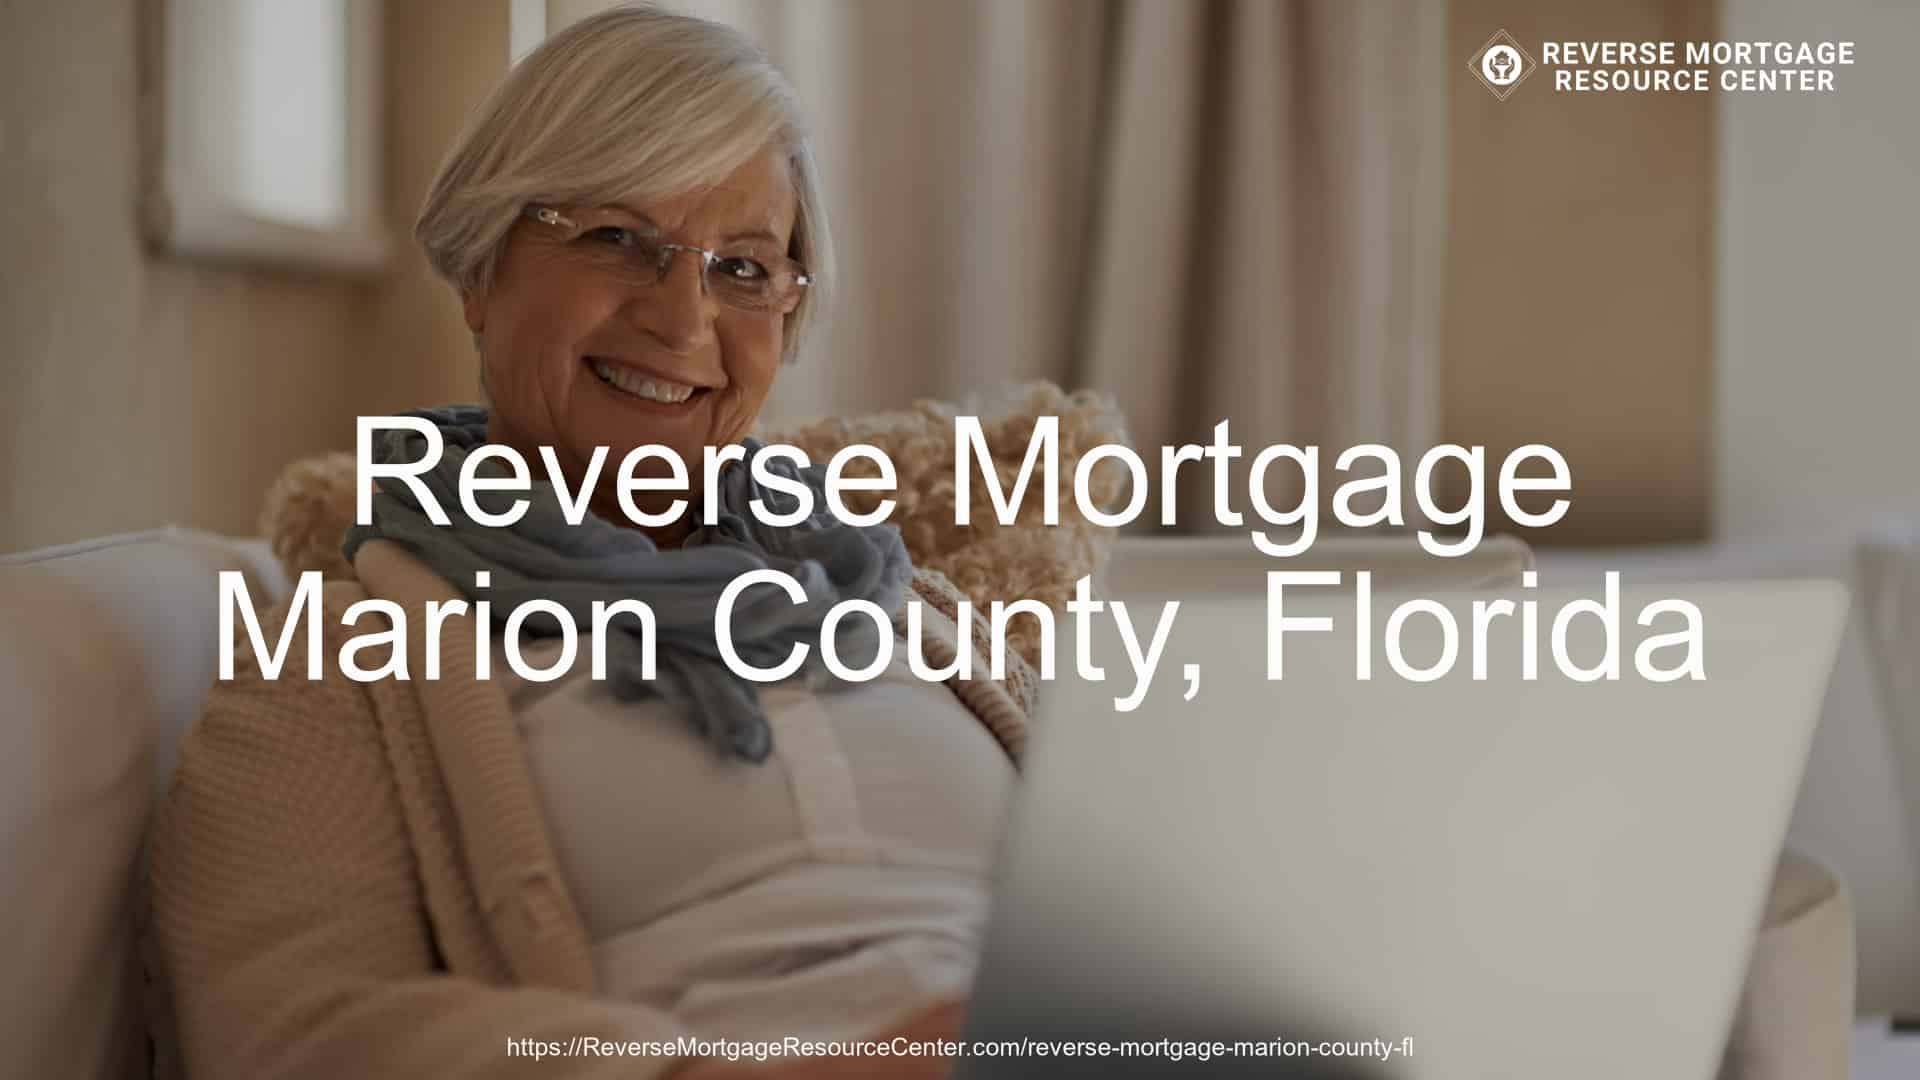 Reverse Mortgage Loans in Marion County Florida